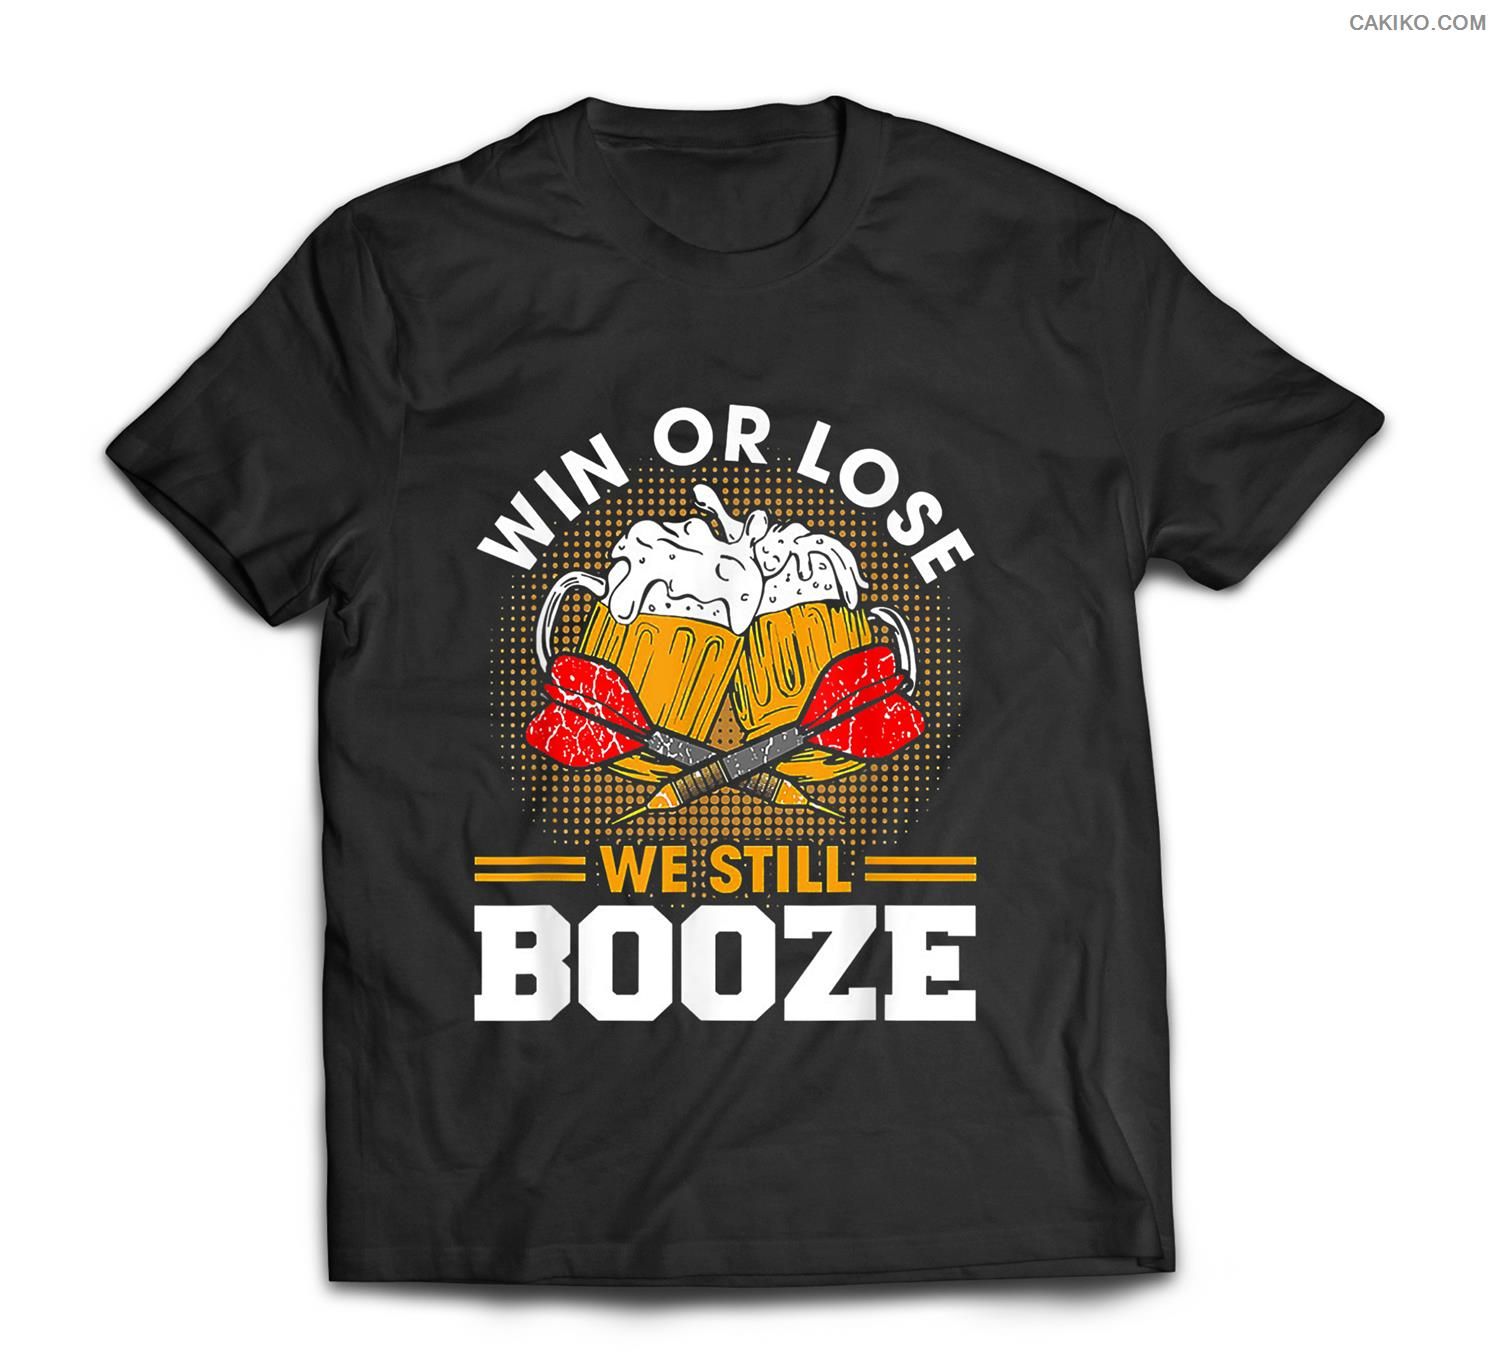 Win Or Lose We Still Booze Funny Beer Drinking T-Shirt